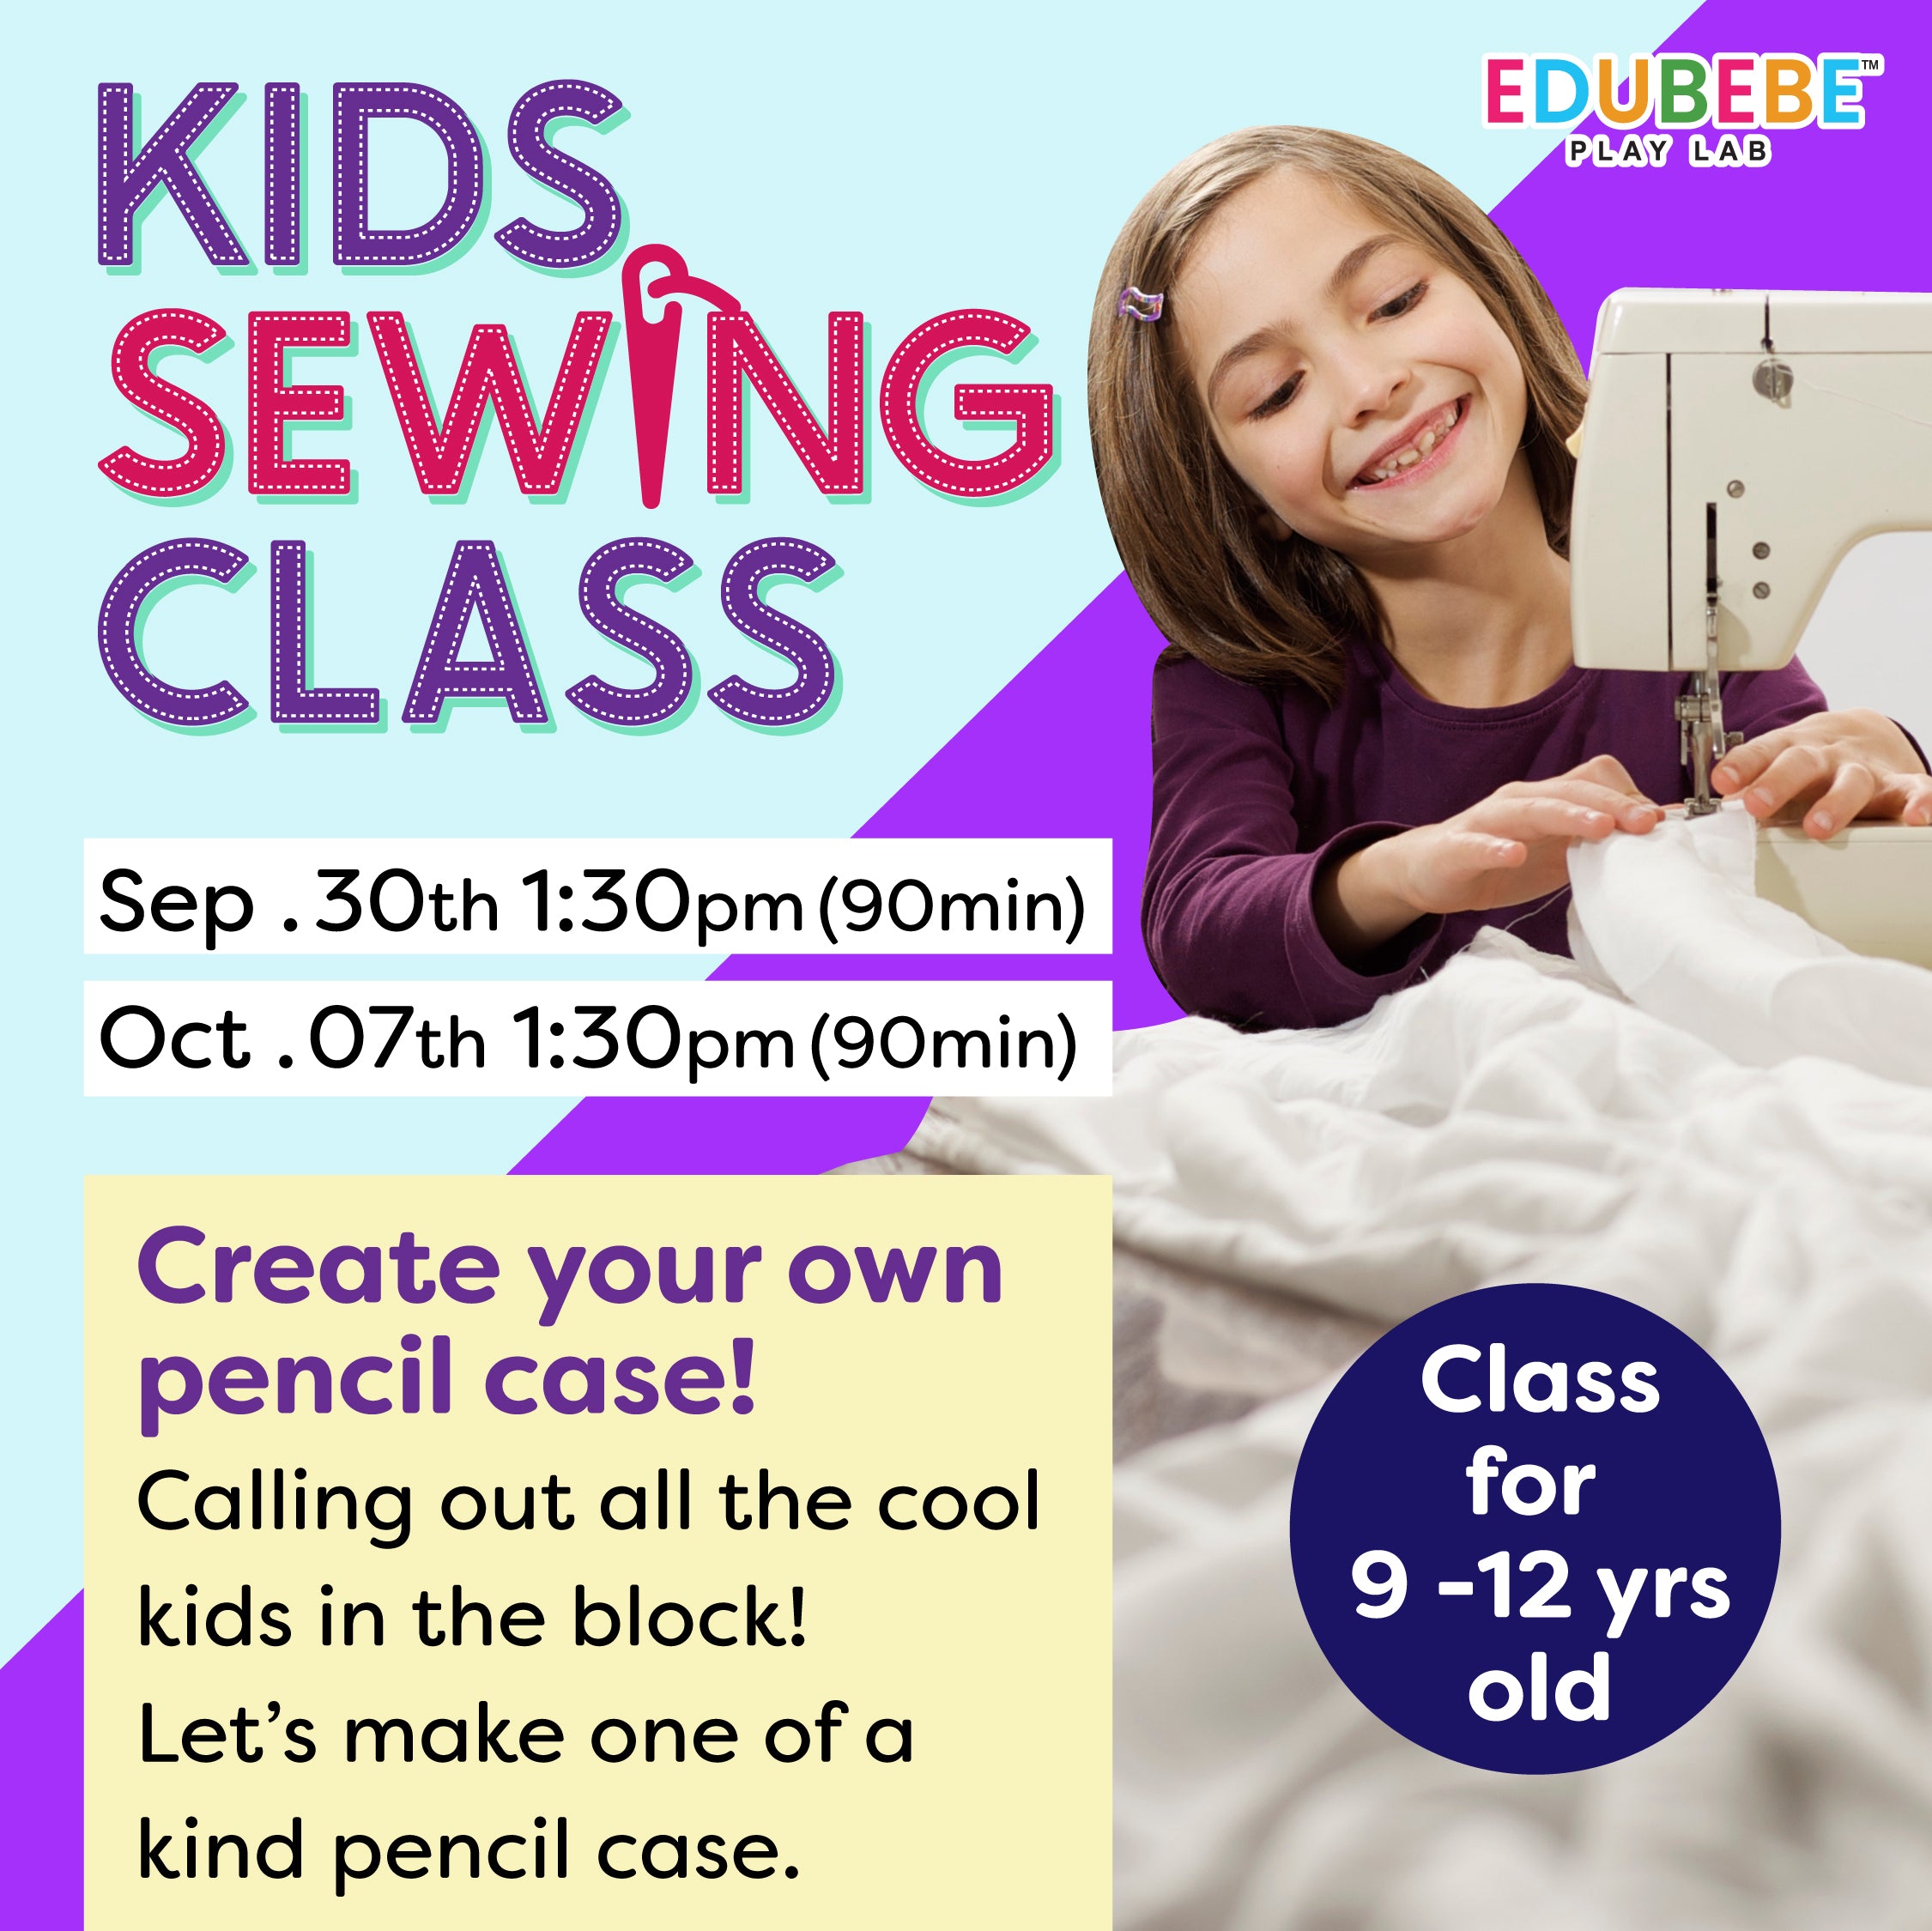 🧵✂️ Kids Sewing Class -Pencil Case Making 9/30 or 10/07 for